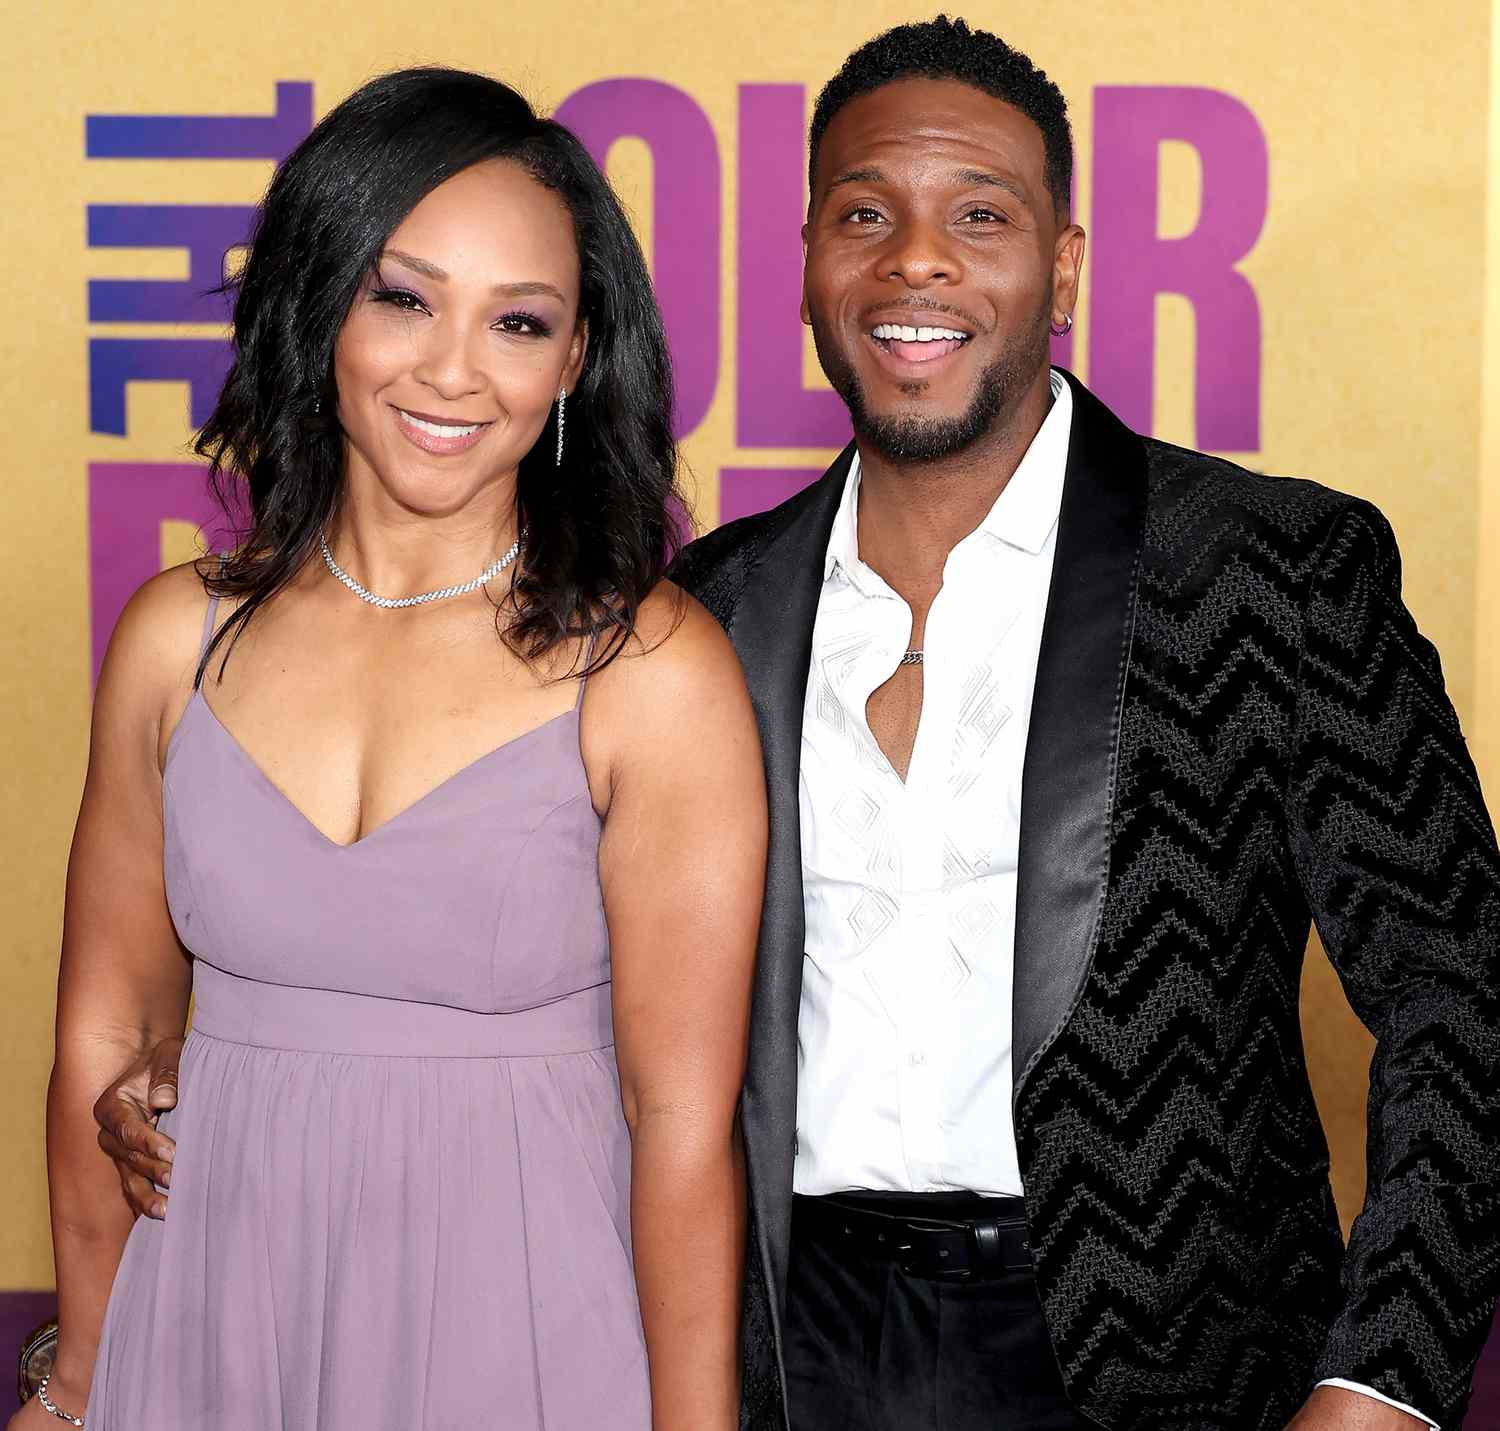 Asia Lee and Kel Mitchell attend the World Premiere of Warner Bros.' "The Color Purple" at Academy Museum